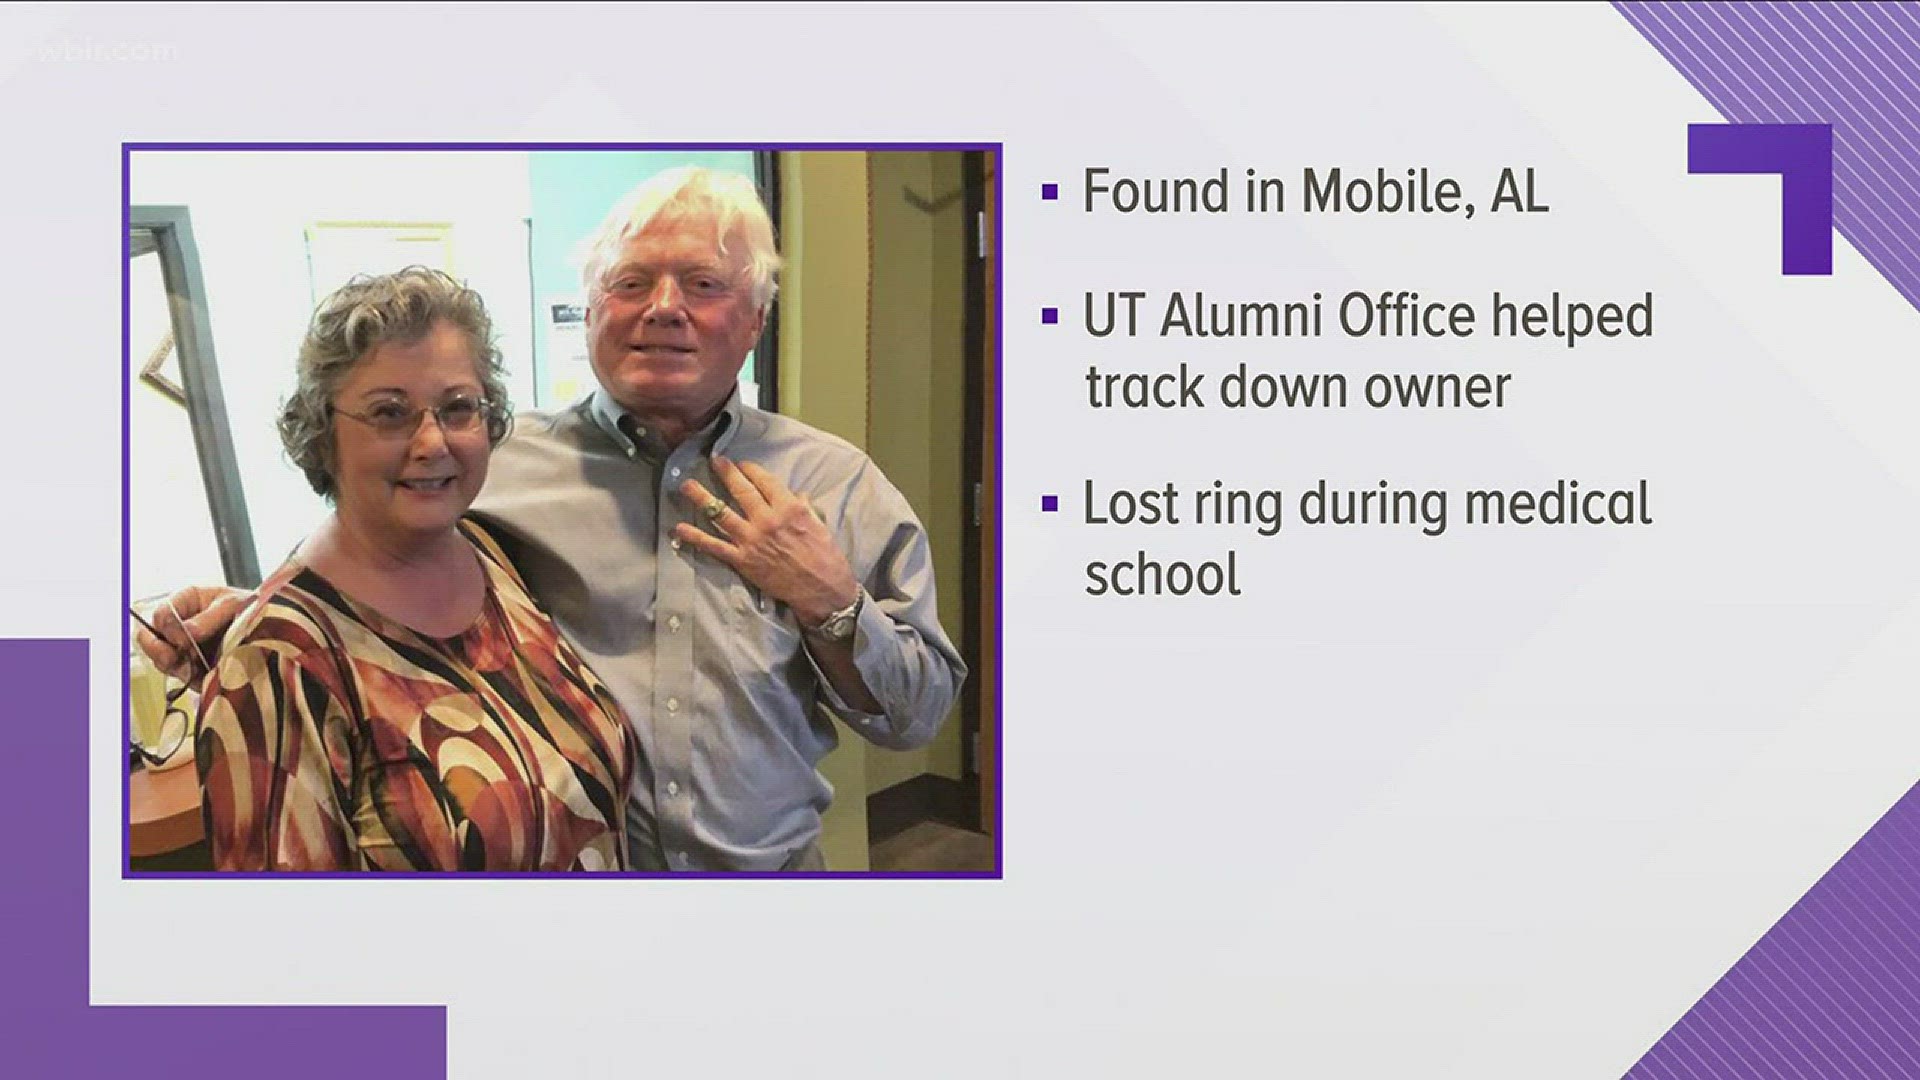 March 6, 2018: A University of Tennessee grad has his class ring back almost 50 years after losing it.